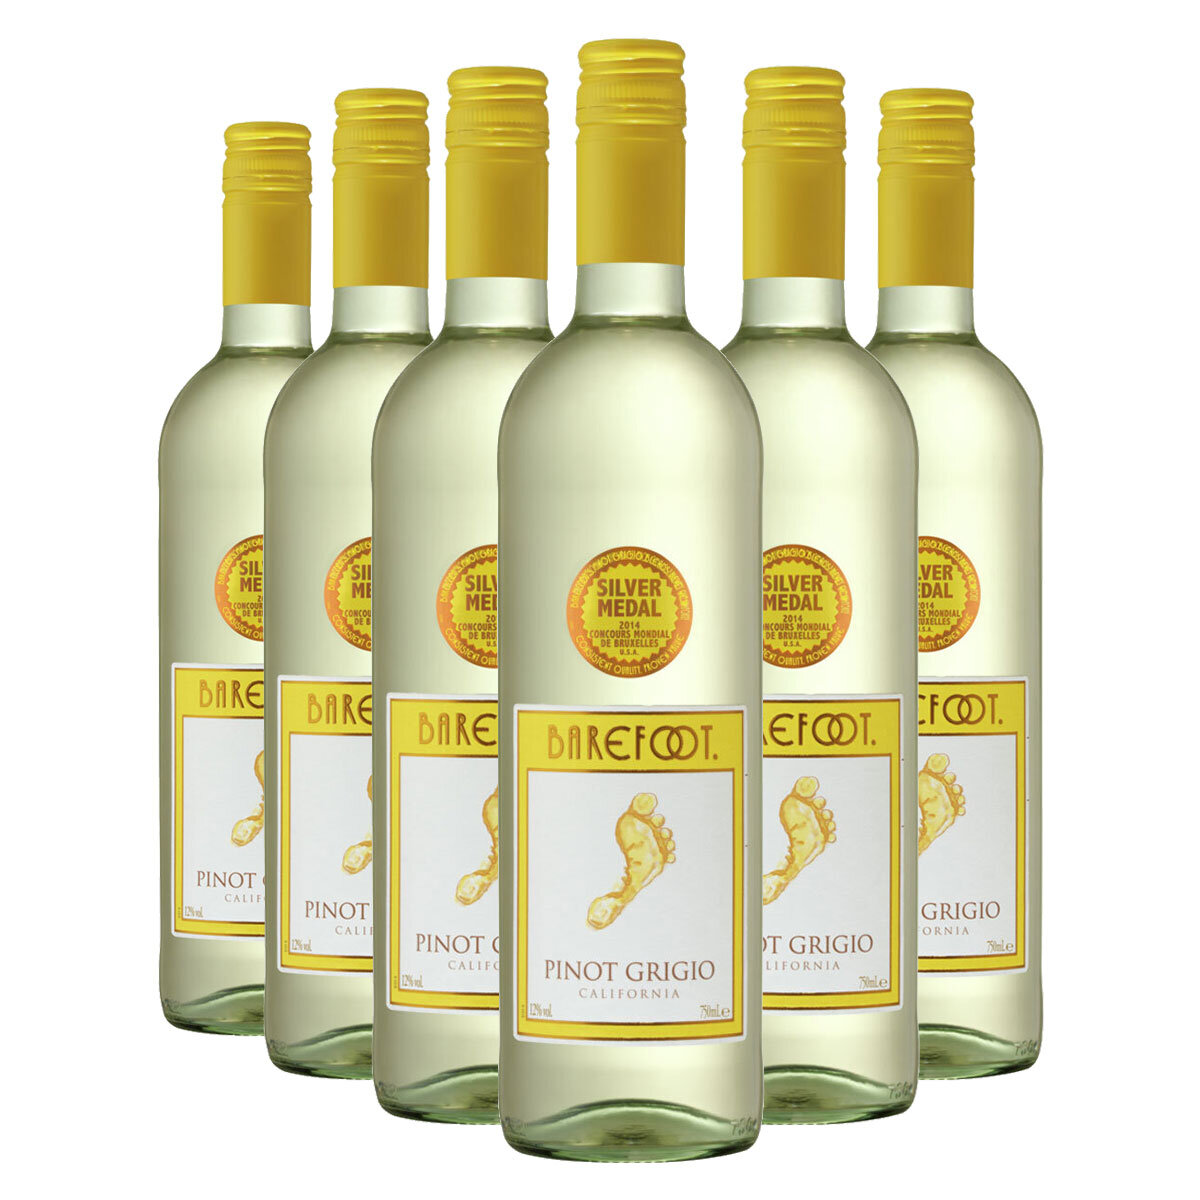 Cut out image of bottles on white background